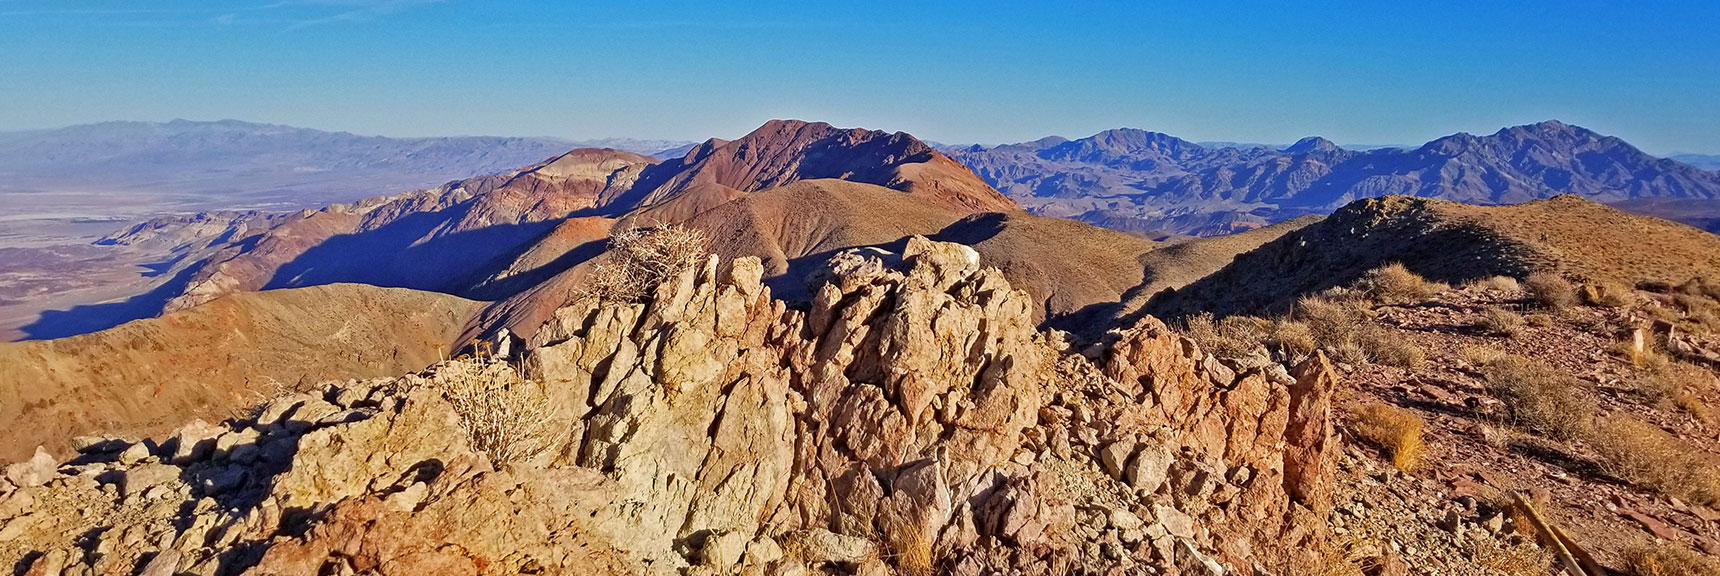 First View of Mt. Perry from Dante's Ridge | Dante's View to Mt. Perry | Death Valley National Park, CA